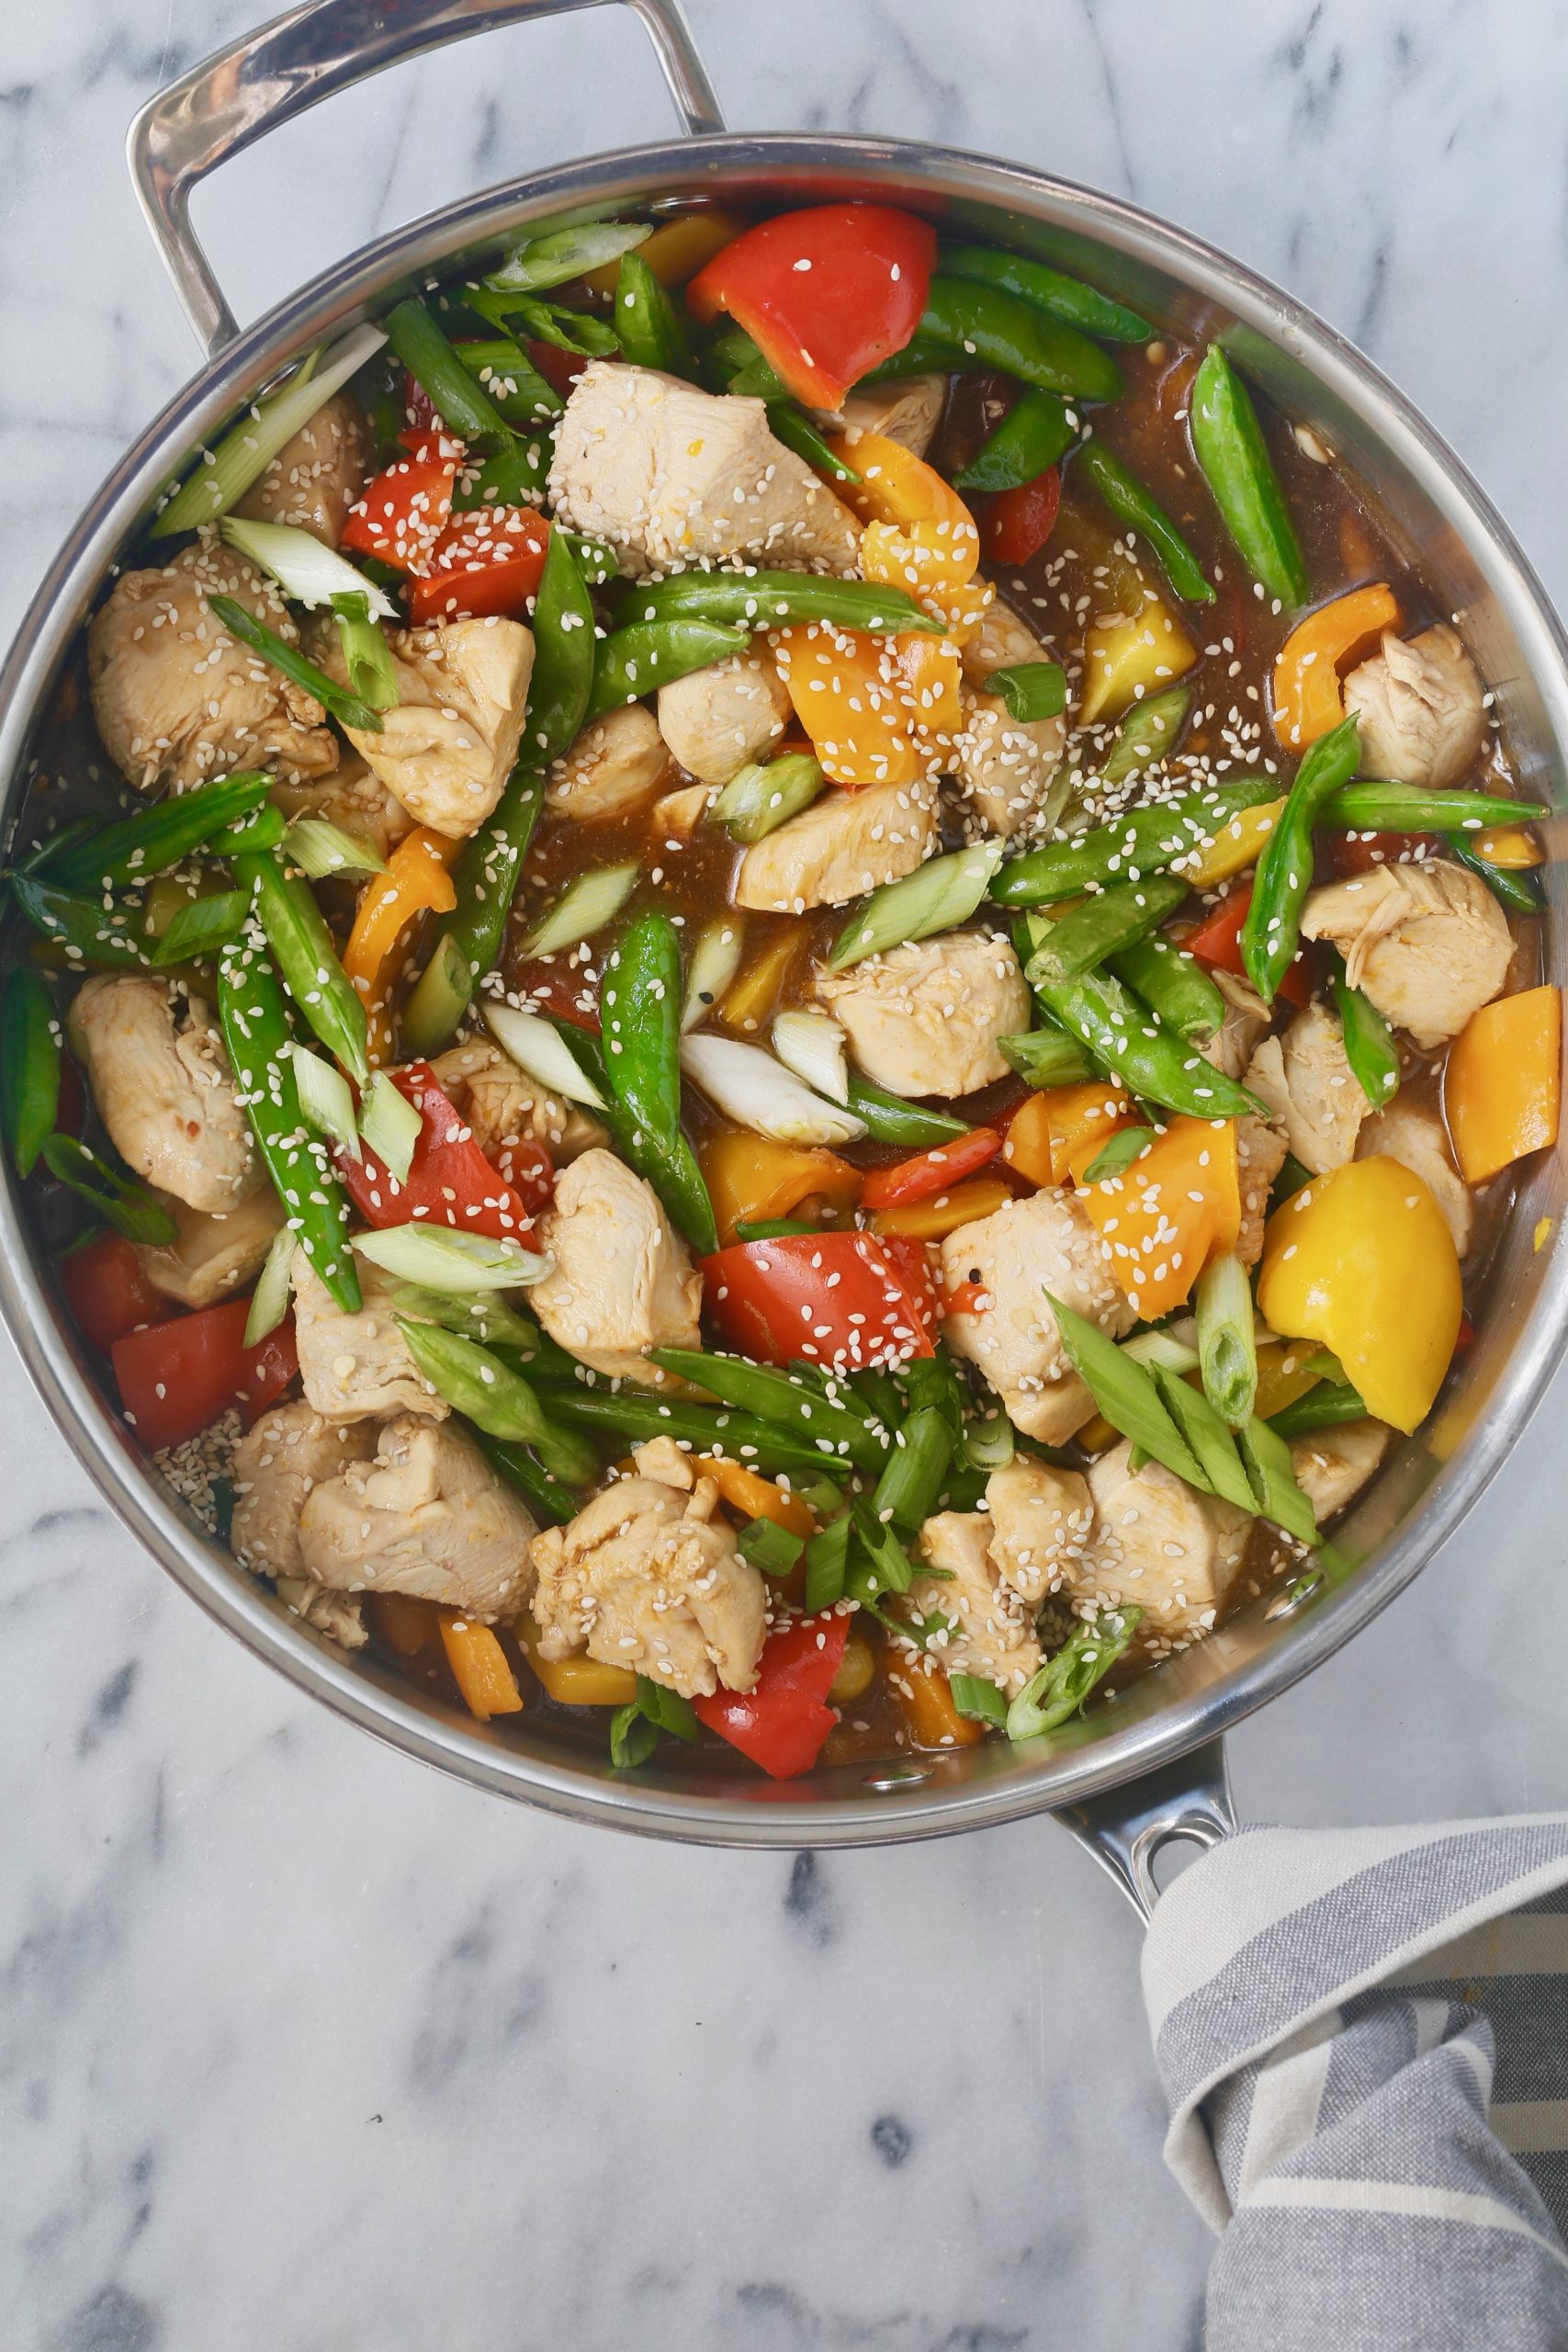 Chicken Stir-Fry with Snow Peas and Mixed Bell Peppers - Eat Good 4 Life